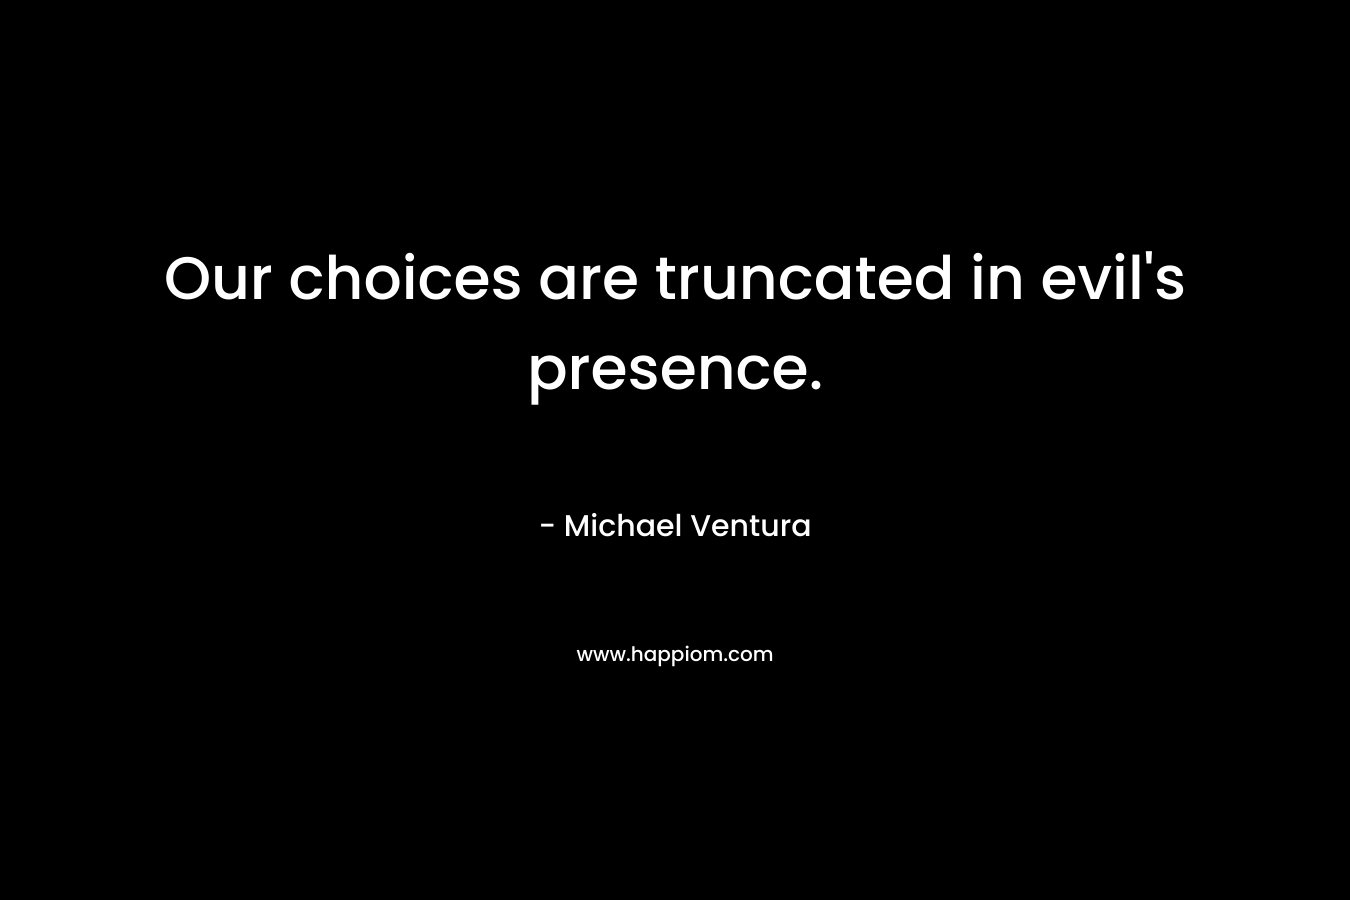 Our choices are truncated in evil's presence.